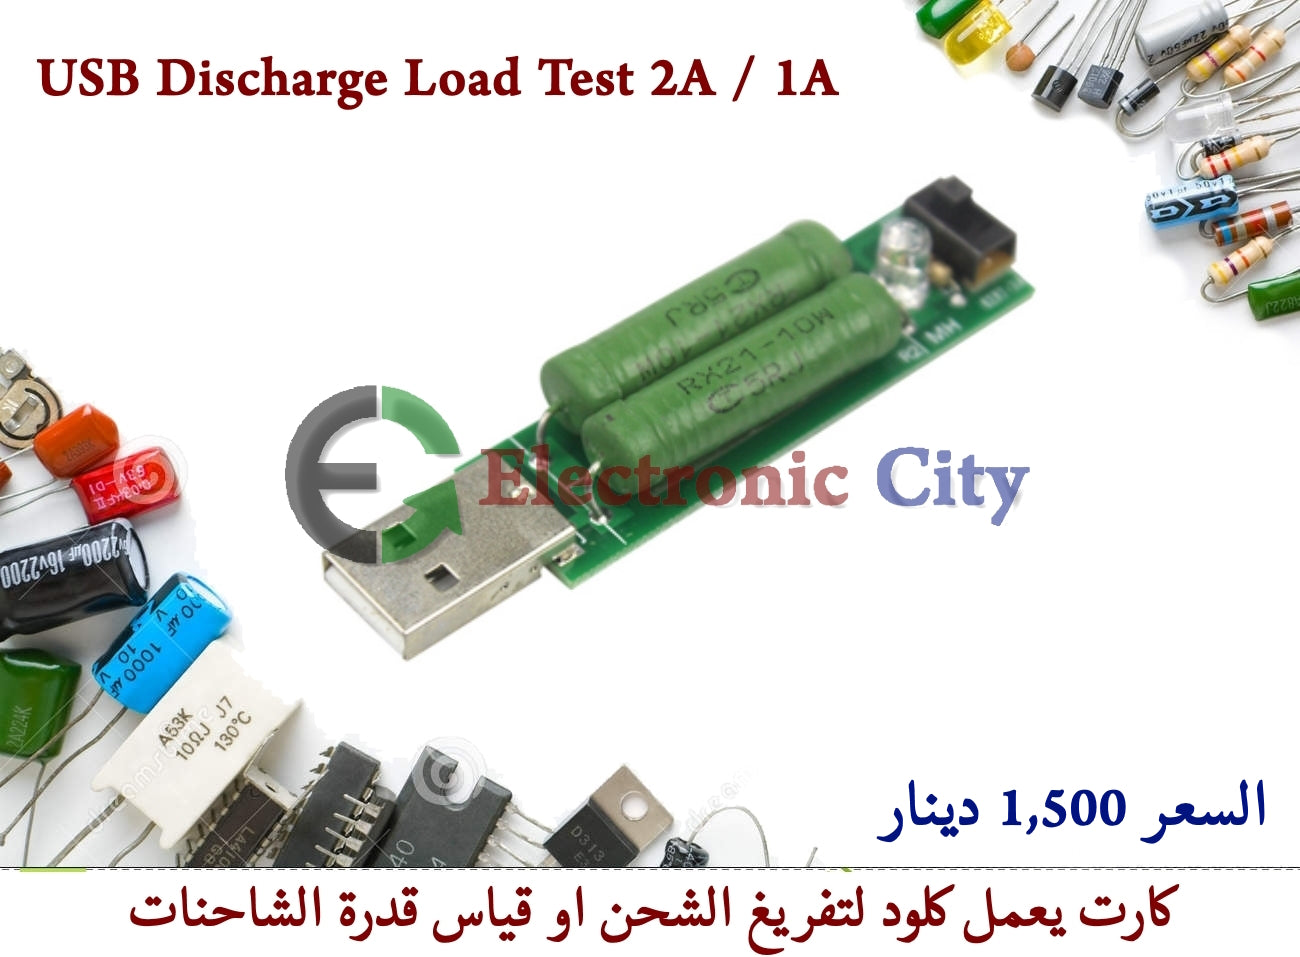 USB Discharge Load Test 2A / 1A #F11 010608